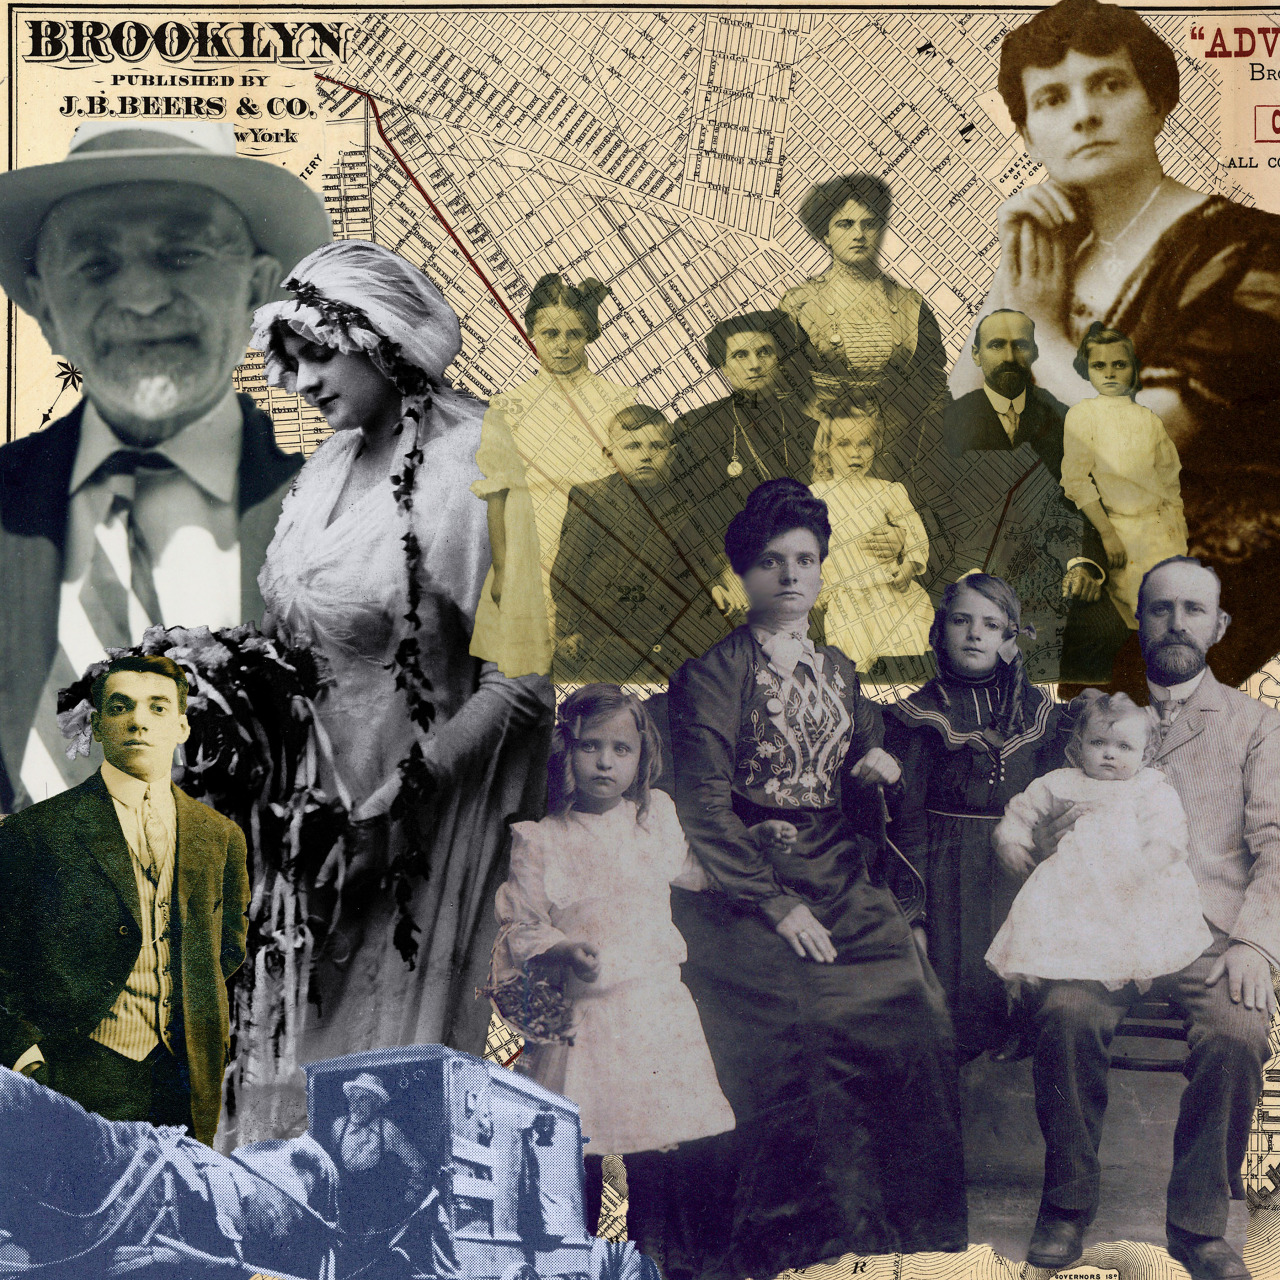  film &amp; photoshop   This family montage, spanning the 20th century, includes my great great grandfather Solomon delivering goods on horse and wagon. I cropped these photos together over an old map of Brooklyn, where they lived. I enjoy these form